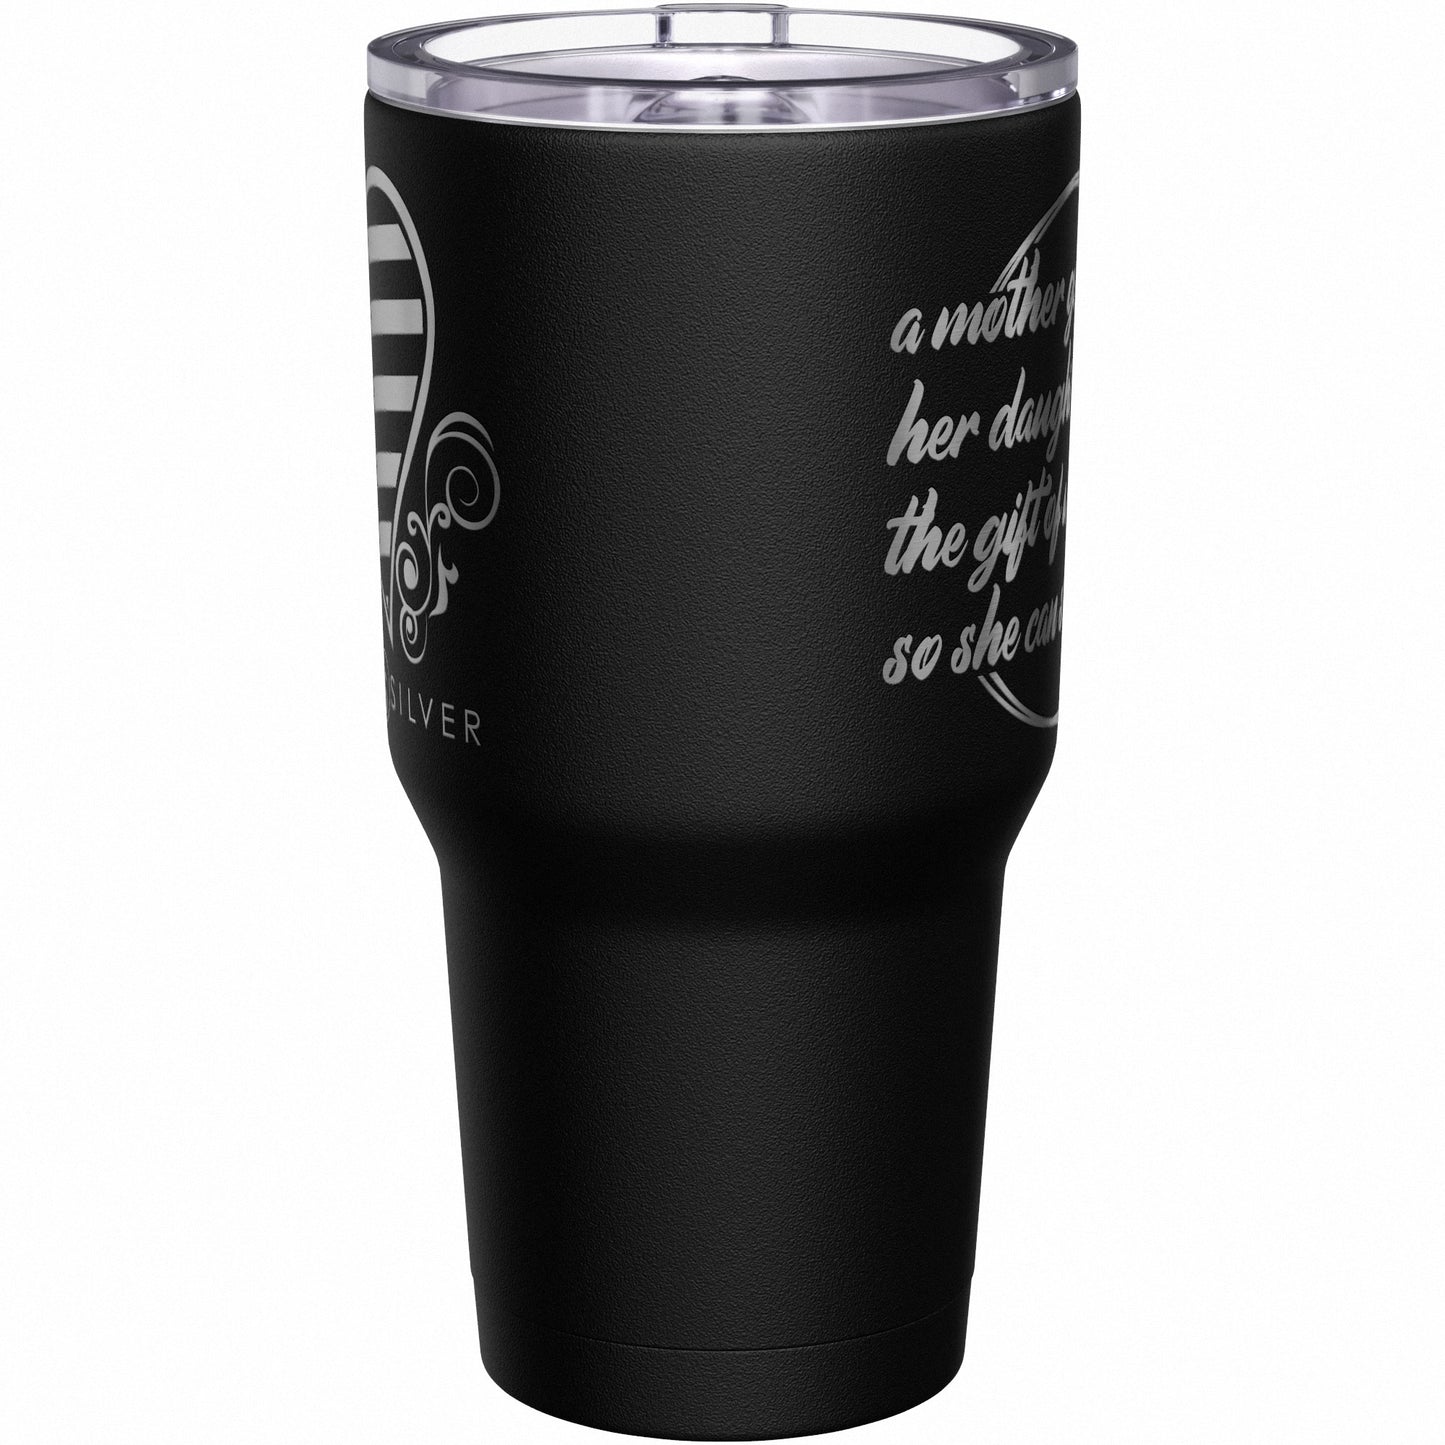 A Mother Gives Her Daughter the Gift of Wings So She Can Soar Tumbler